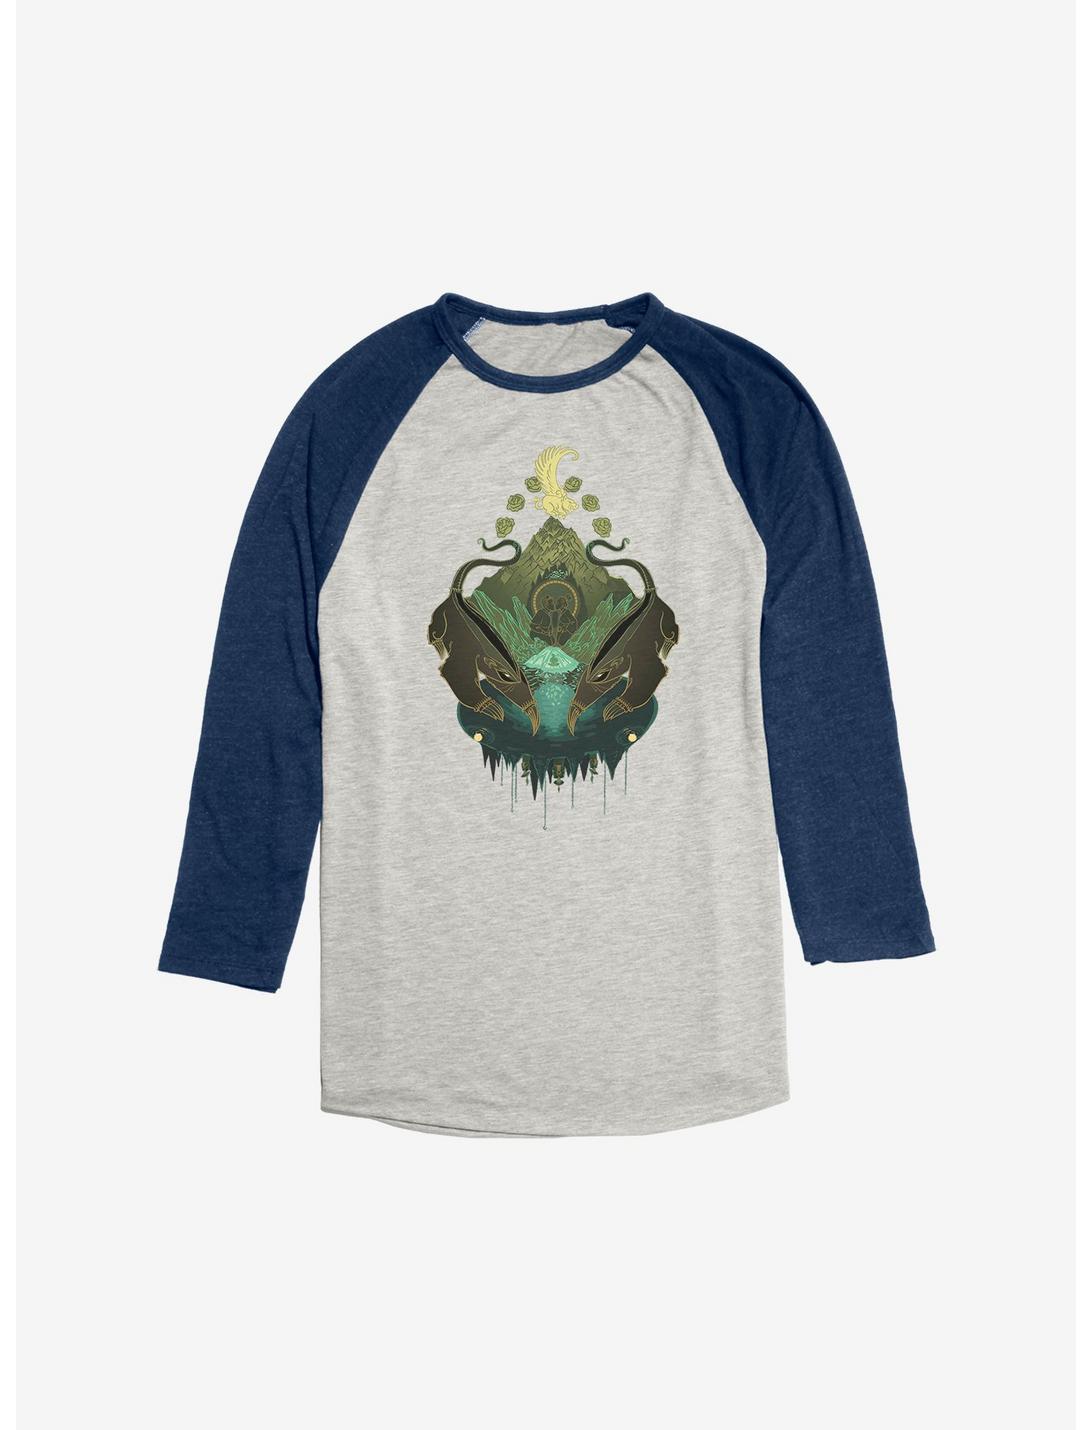 Avatar: The Last Airbender Through The Earth Raglan, Oatmeal With Navy, hi-res